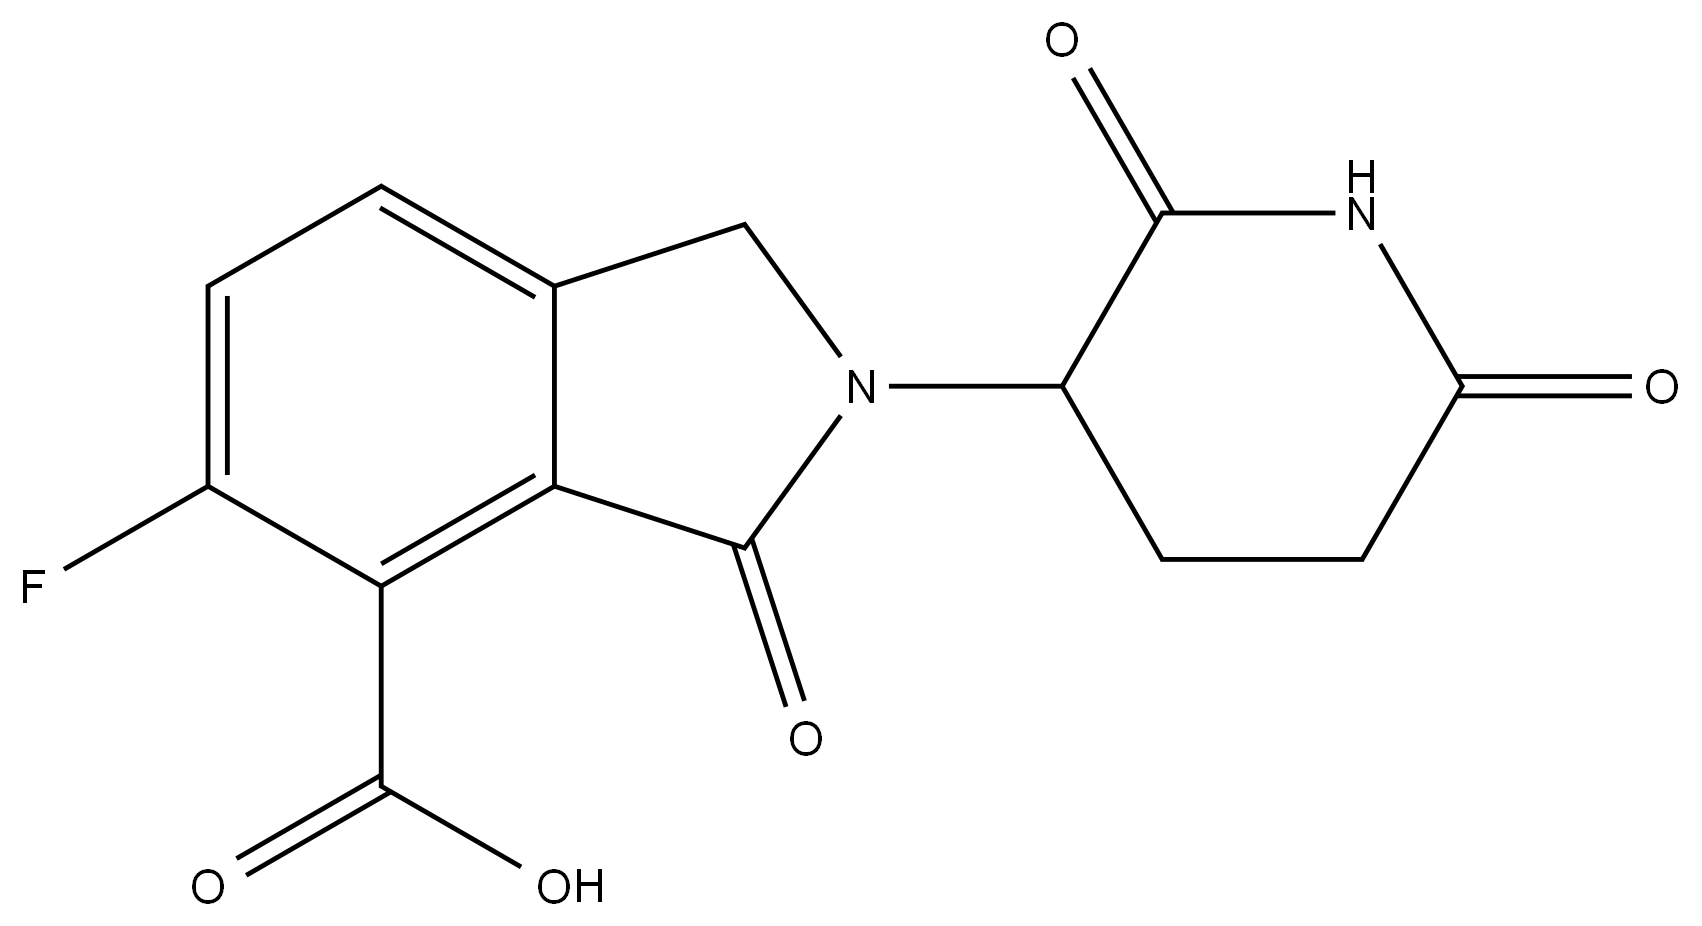 2-(2,6-dioxopiperidin-3-yl)-5-fluoro-3-oxoisoindoline-4-carboxylic acid Structure